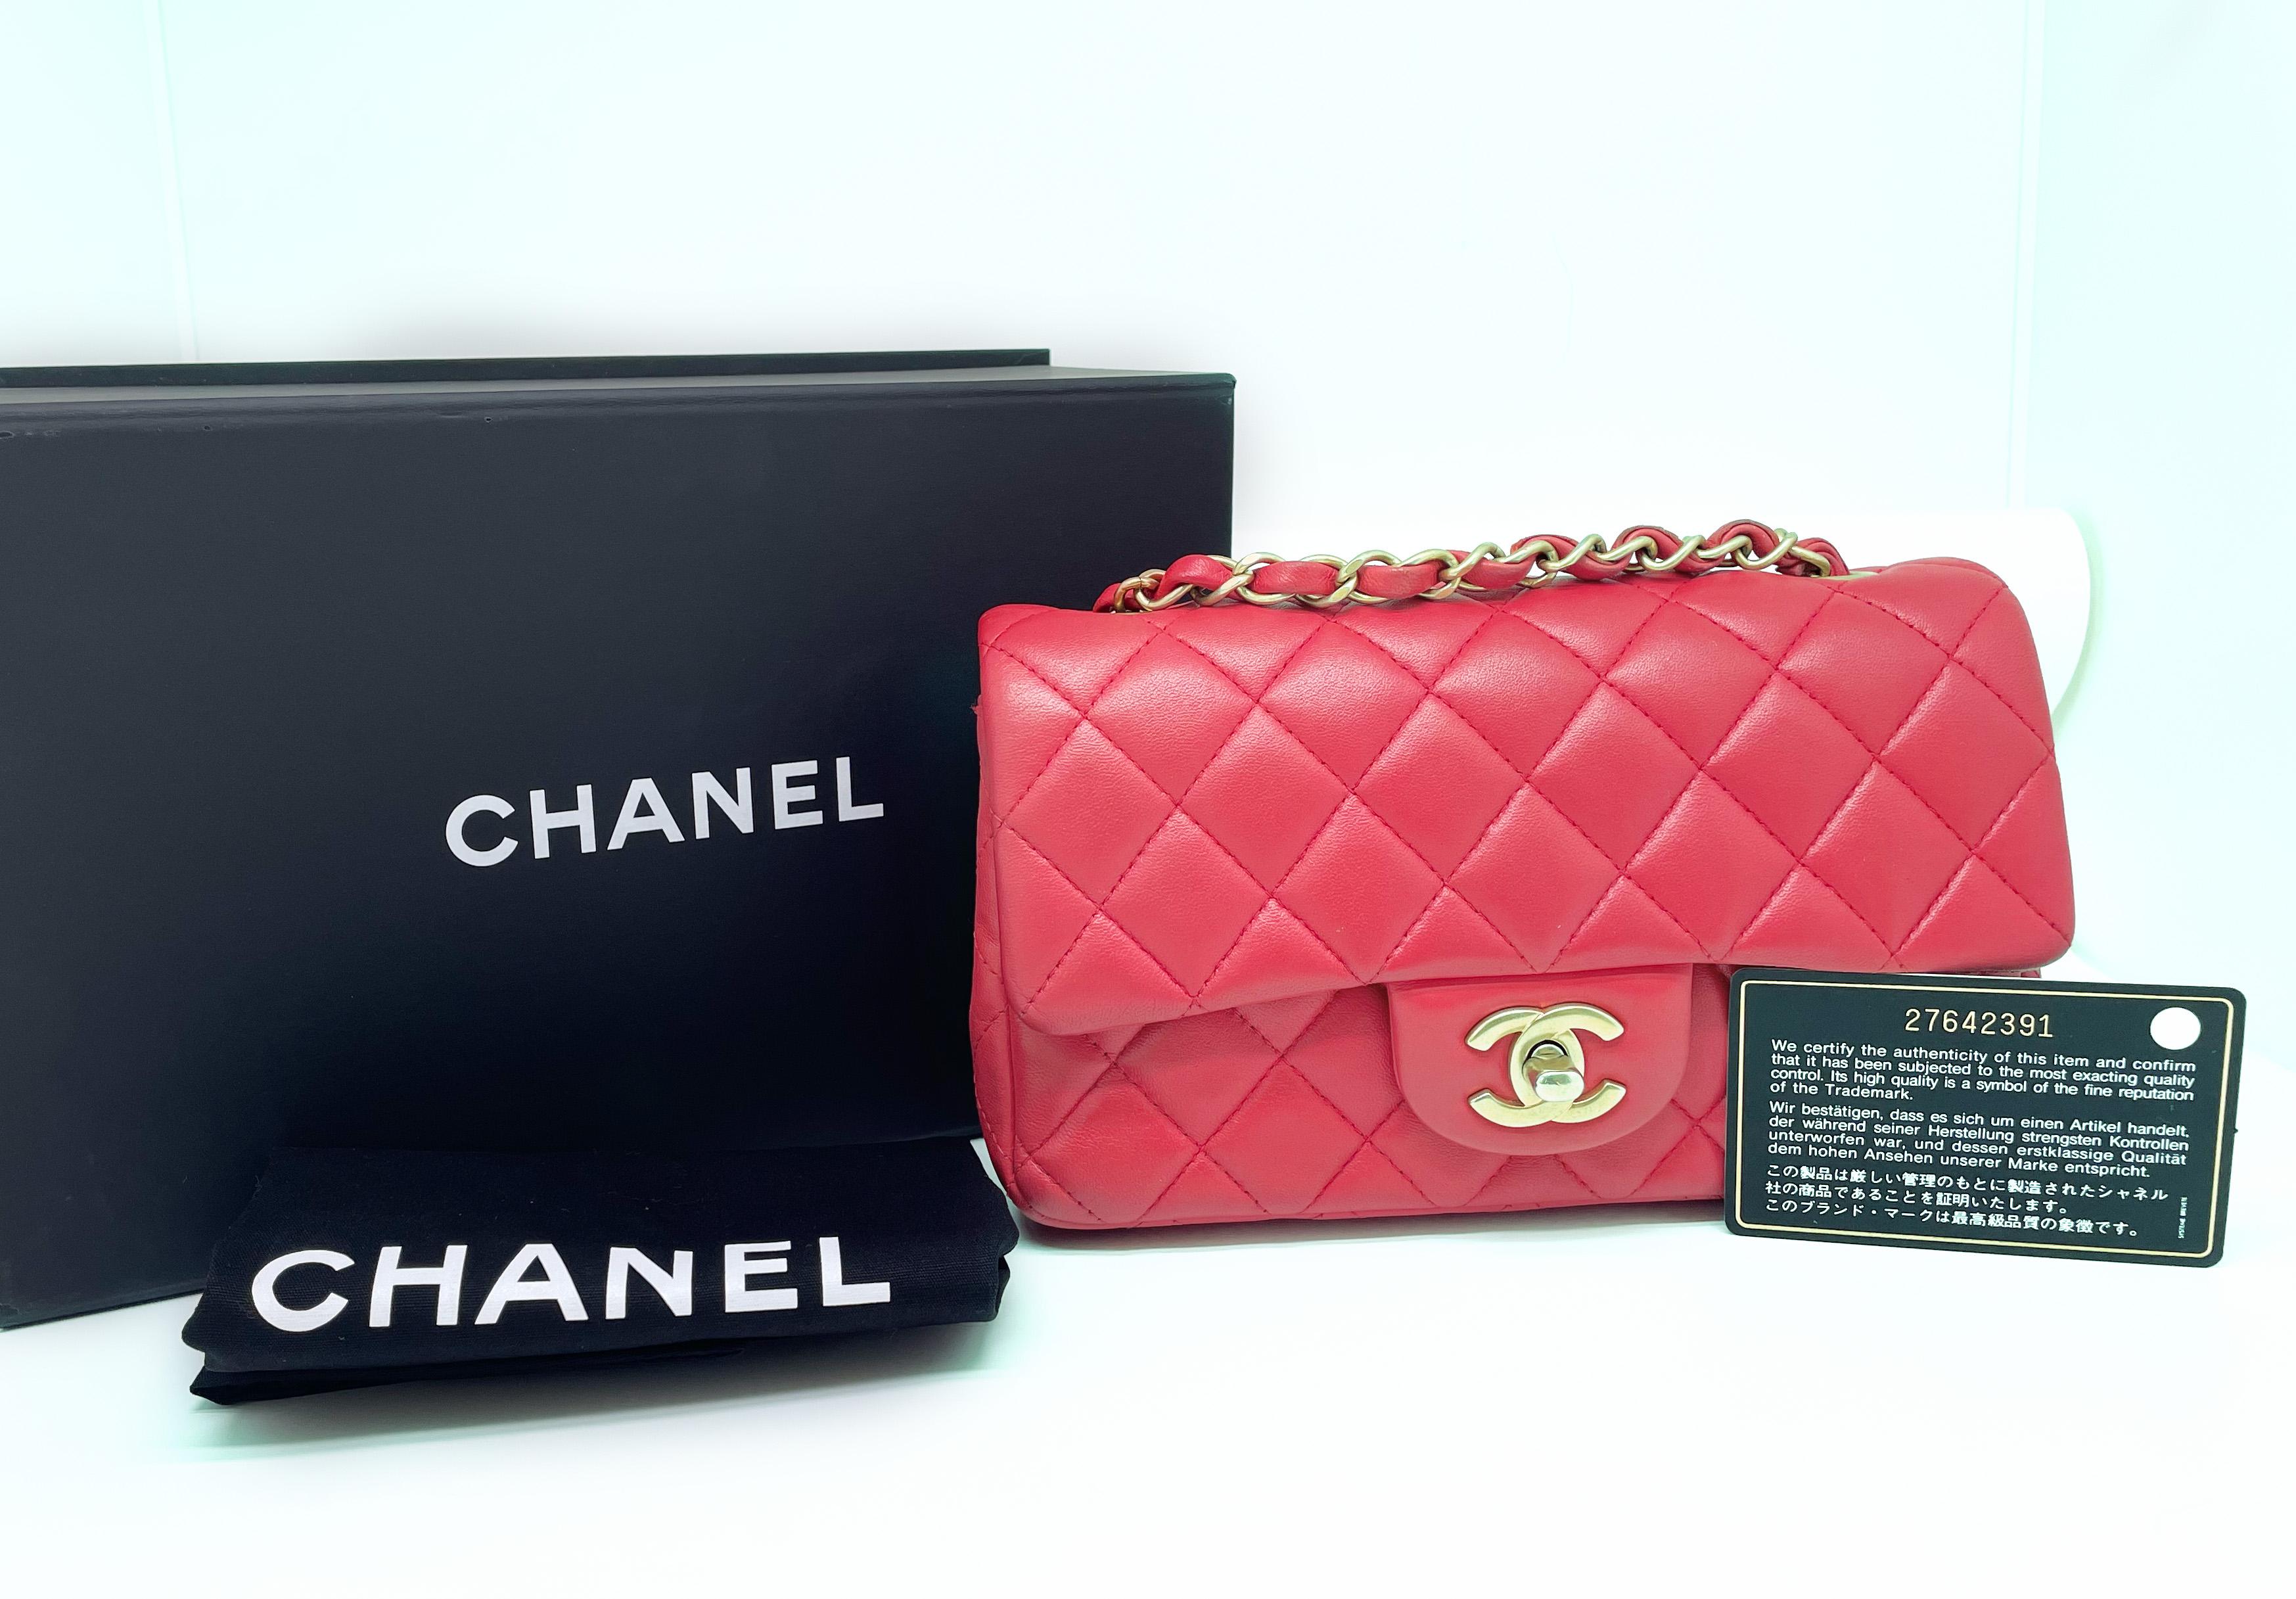 Perfect Chanel Mini/Petit Timeless “Must Have” shoulder flap bag in leather
of red quilted lamb, gold metal trim, chain handle in
gold metal interwoven with red leather for shoulder or crossbody wear.
Single flap Flap closure One patch pocket on the